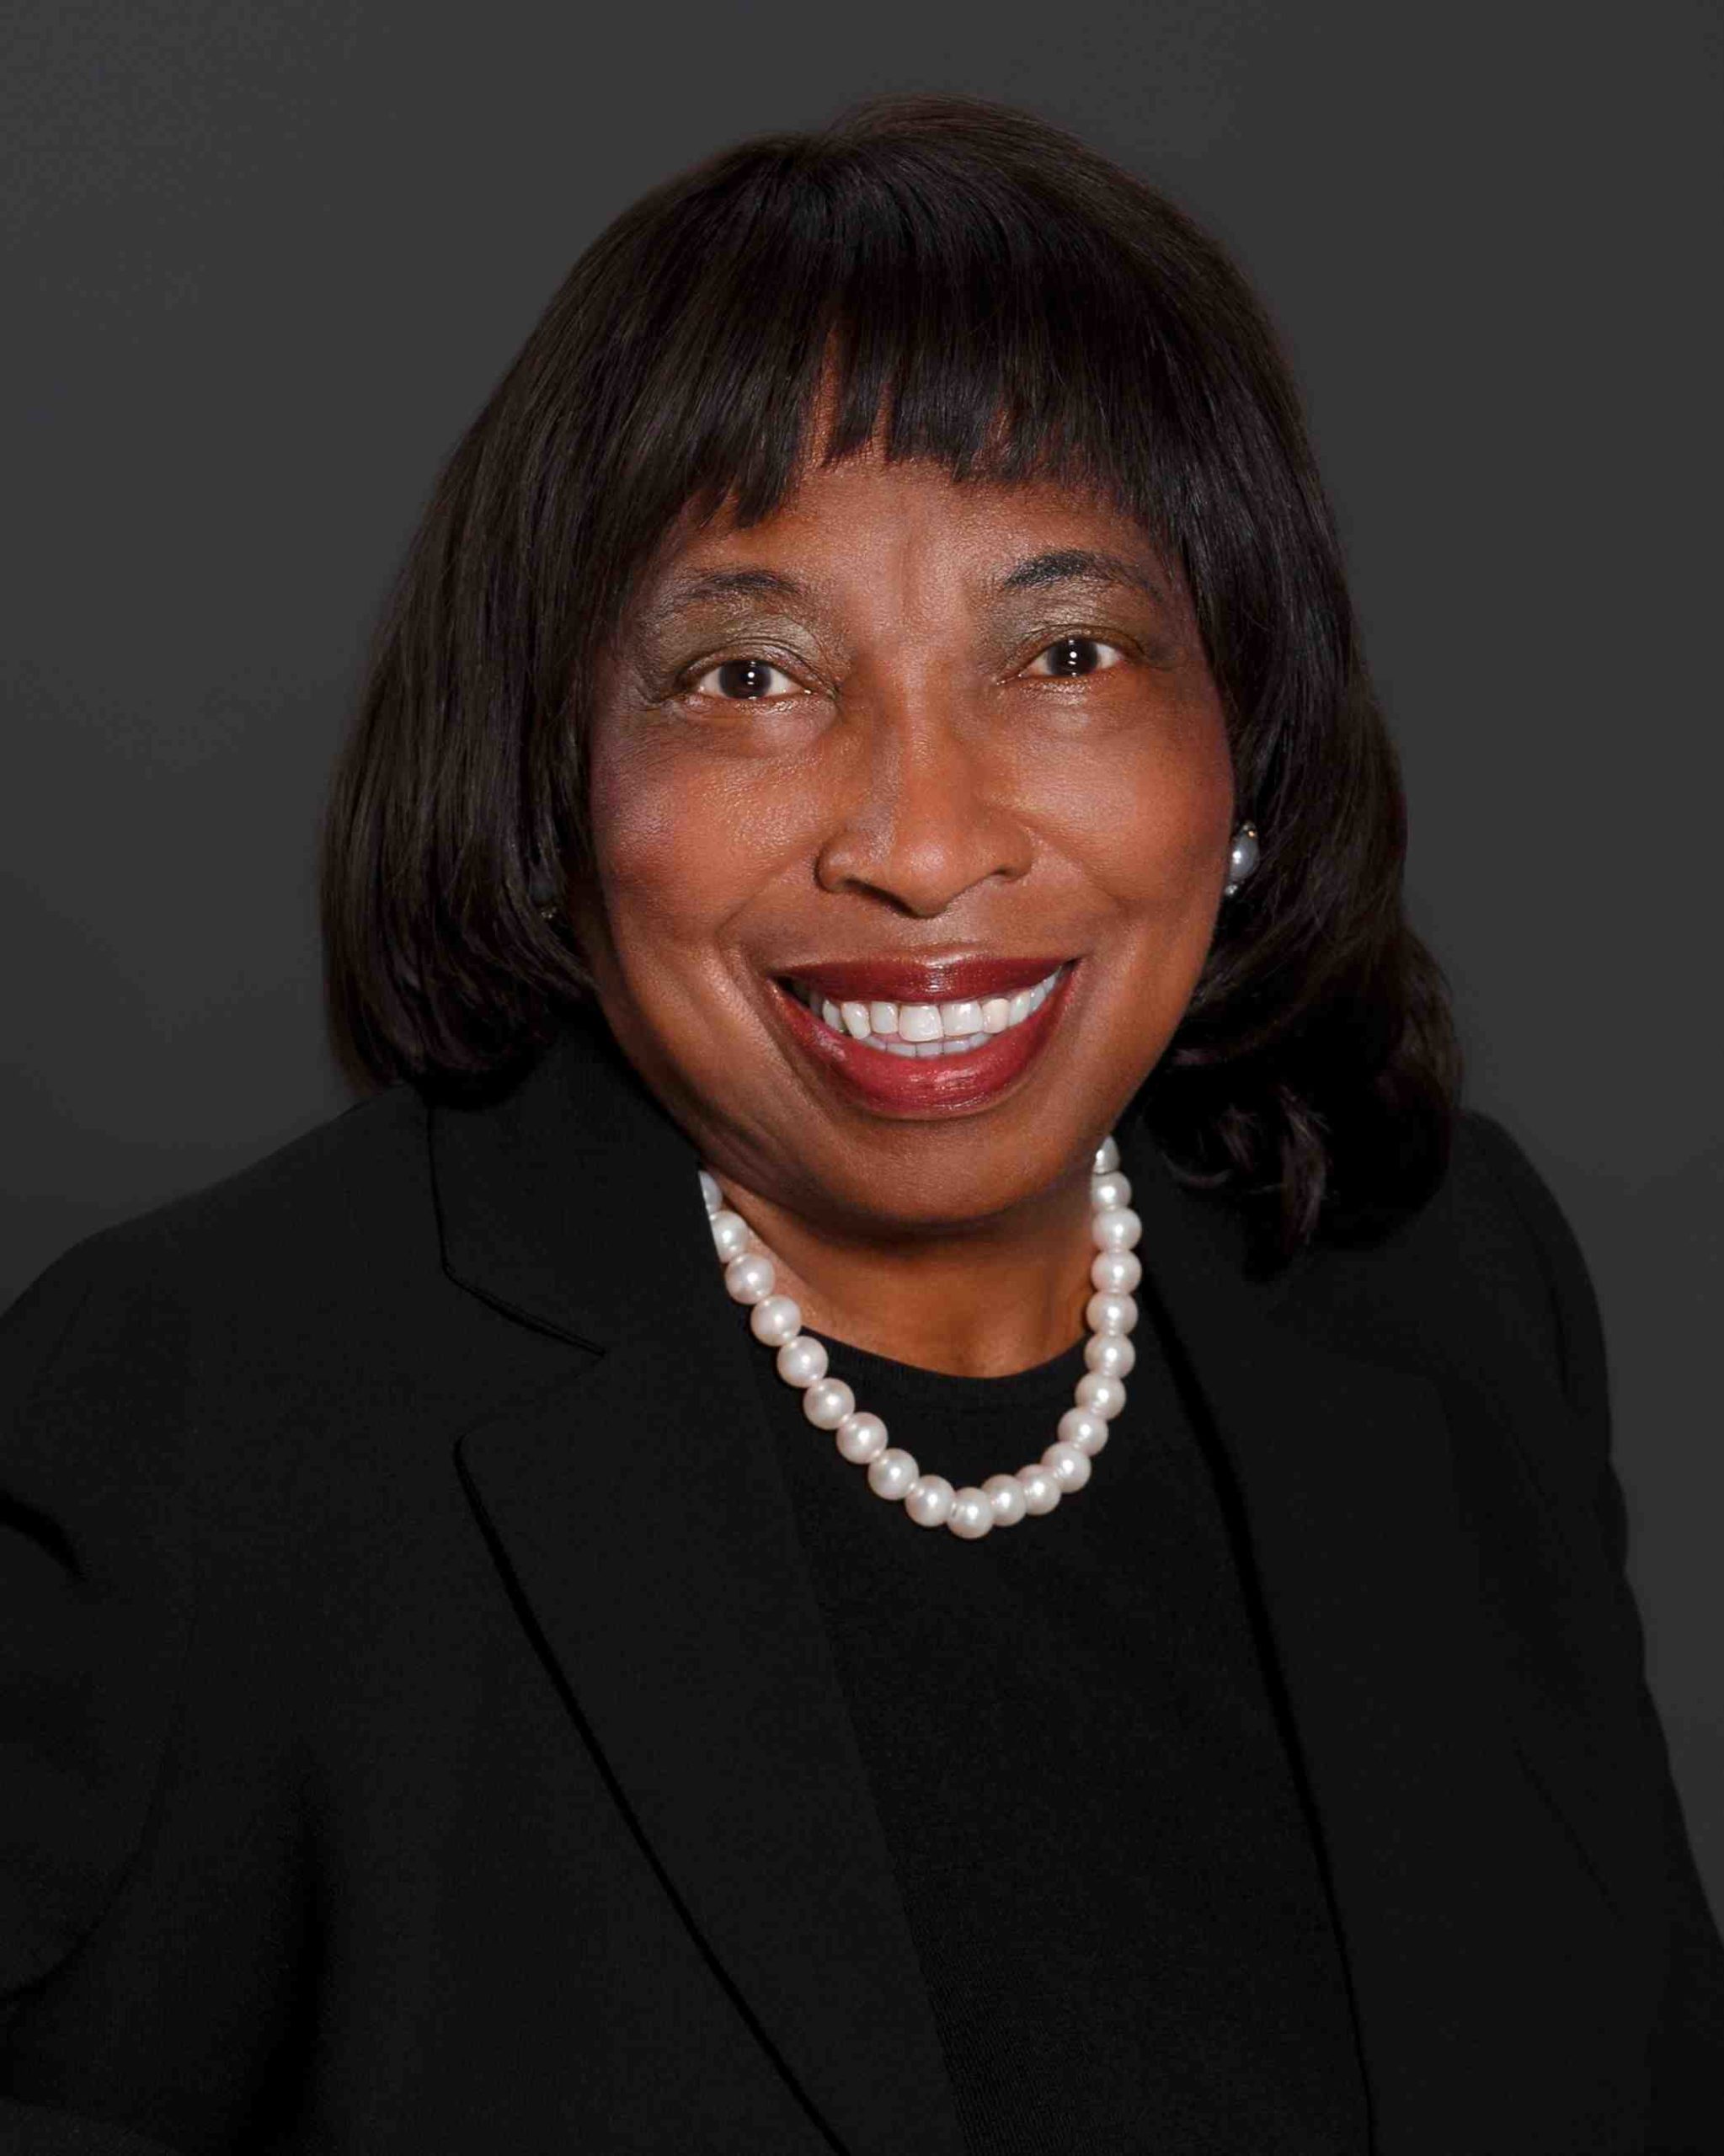 Judge Bernice B. Donald, ANTITRUST, APPELLATE, BANKING/LENDER LIABILITY, BANKRUPTCY/RESTRUCTURING, CIVIL RIGHTS, CLASS ACTION, COMMERCIAL DISPUTES, COMPLEX LITIGATION, CONSTRUCTION, CONTRACTS, CORPORATE INVESTIGATIONS/WHITE COLLAR, EMPLOYMENT, ENERGY, OIL, GAS & WATER, ENVIRONMENTAL/CERCLA, INSURANCE/REINSURANCE, INTELLECTUAL PROPERTY, INTERNATIONAL ARBITRATION, MARITIME, MASS TORTS, MDL, MONITORING, PATENT/SEP, PHARMACEUTICALS, PRODUCT LIABILITY, REAL ESTATE, SECURITIES/FINANCIAL SERVICES, SPECIAL MASTER, TELECOMMUNICATION, TRADE SECRET, TRADEMARK & COPYRIGHT